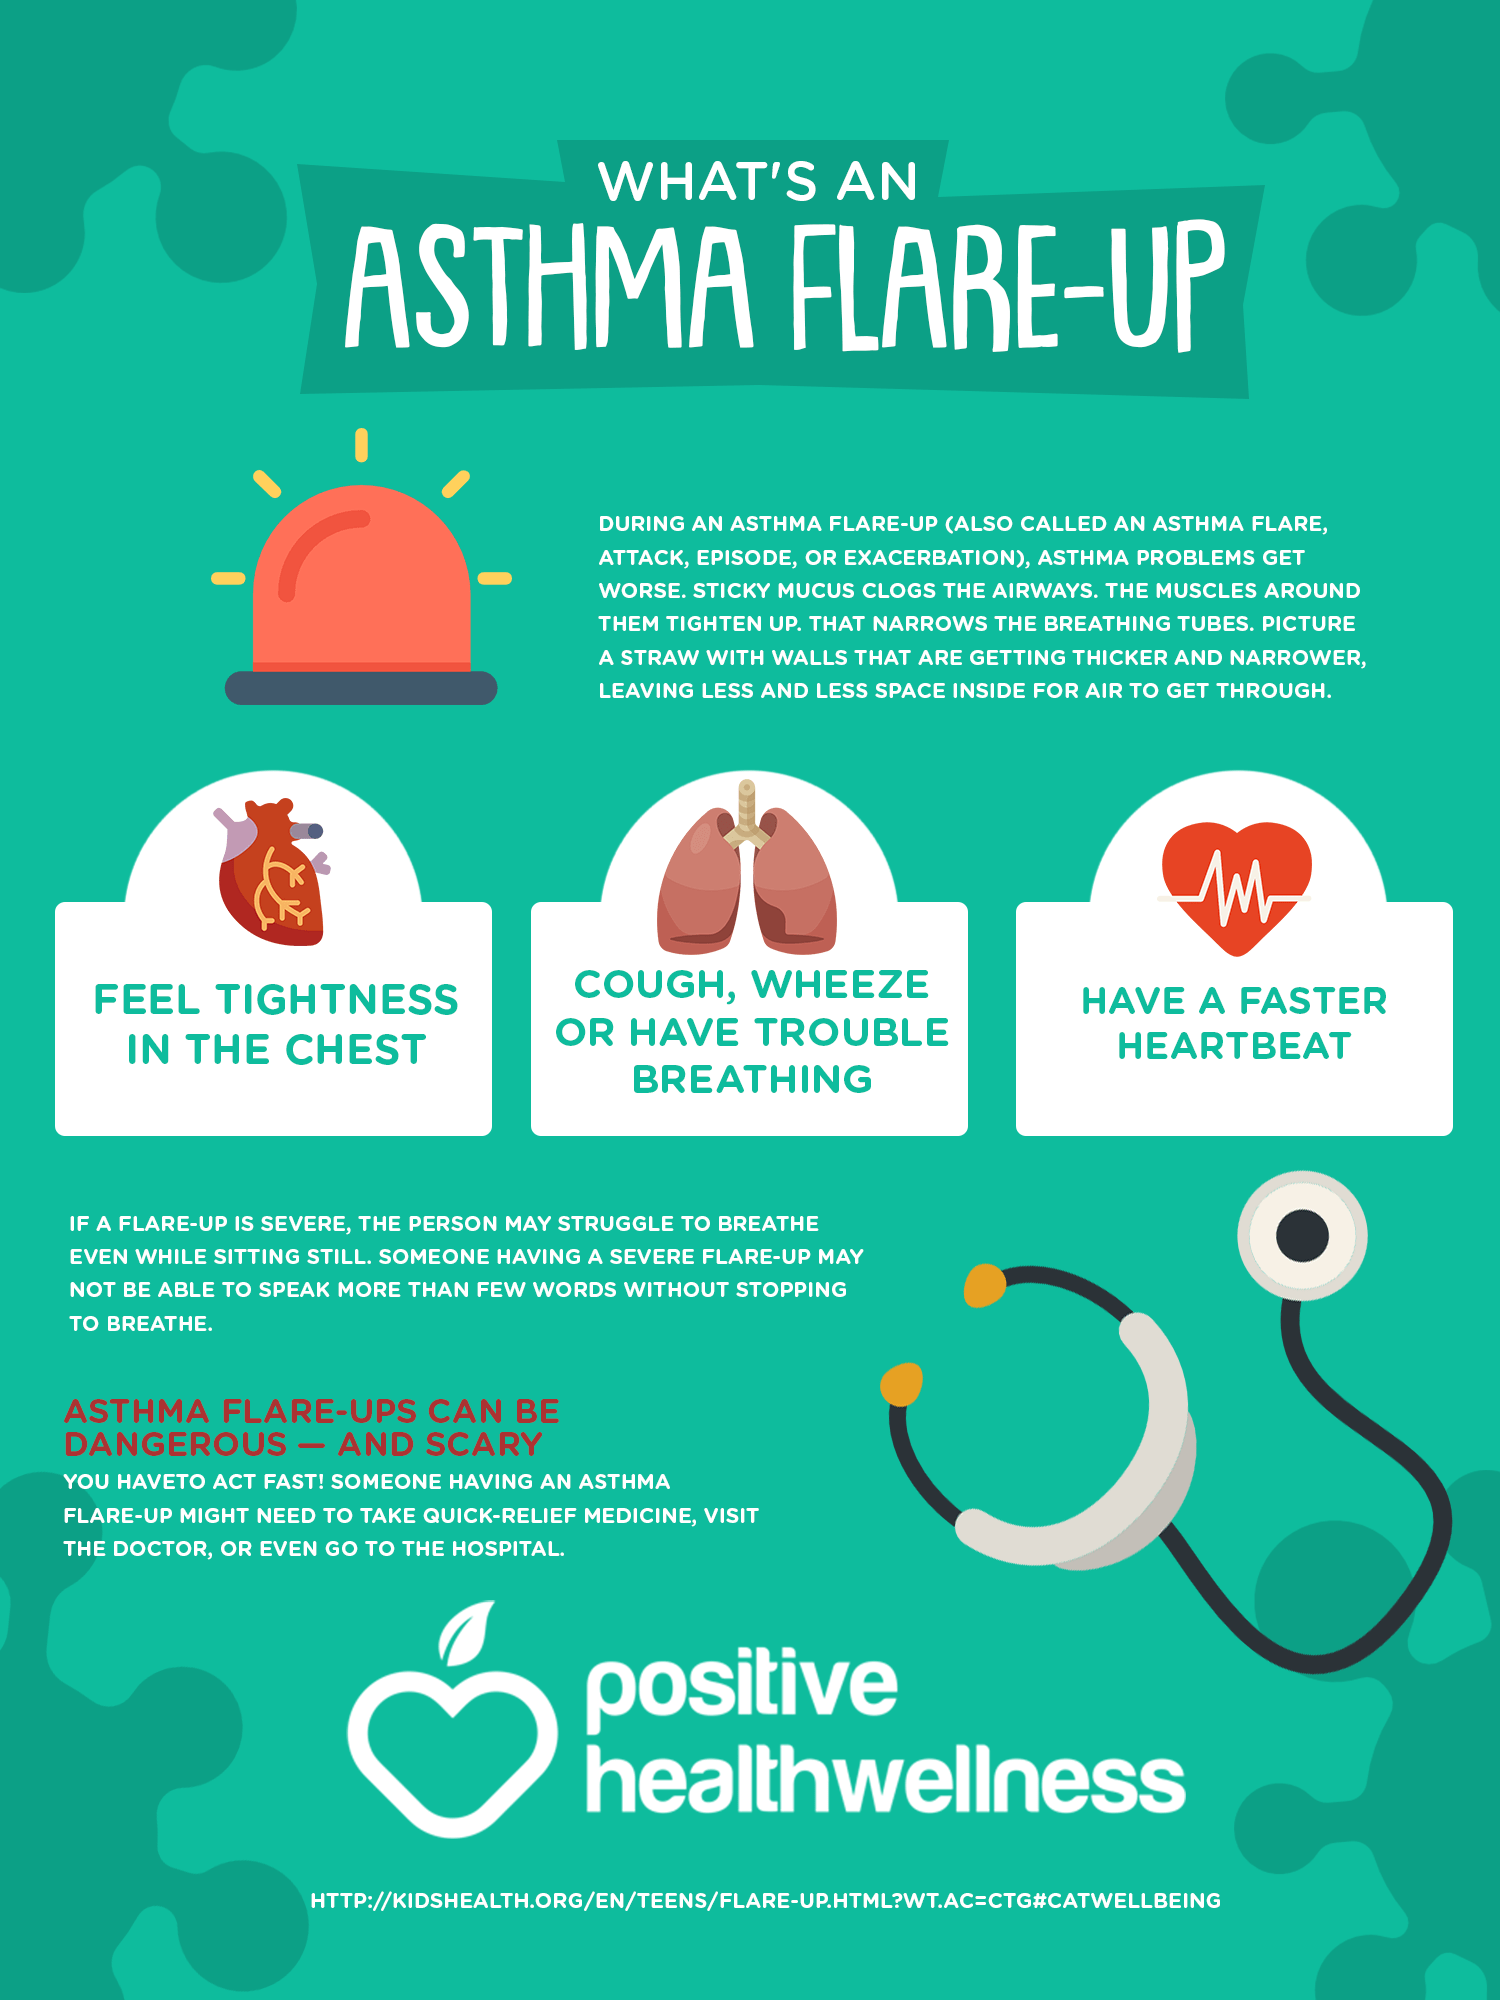 Asthma Flare Up